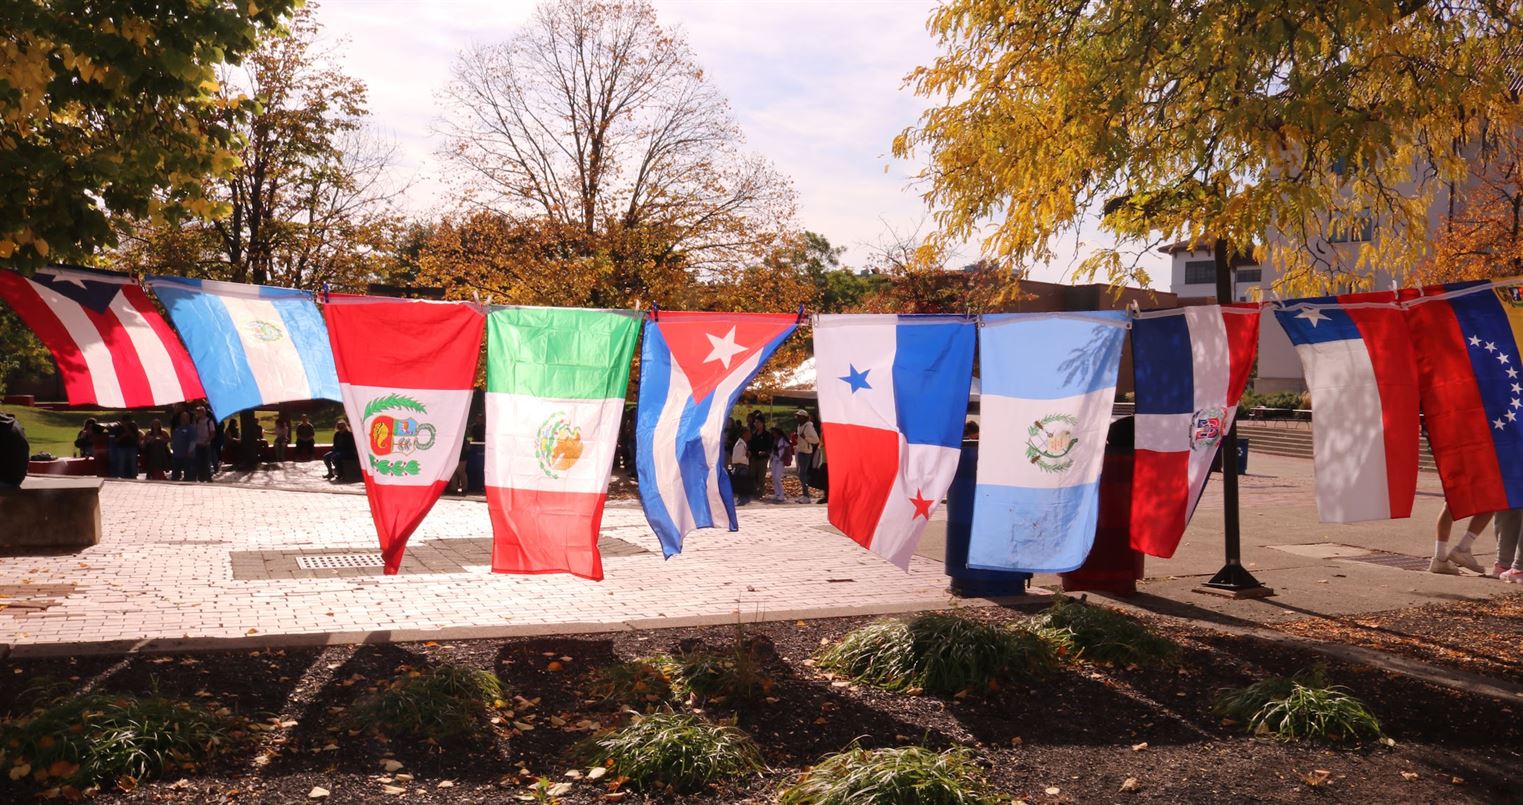 Flags of different Hispanic/ Latino countries are displayed in the student center quad for the Block Party.